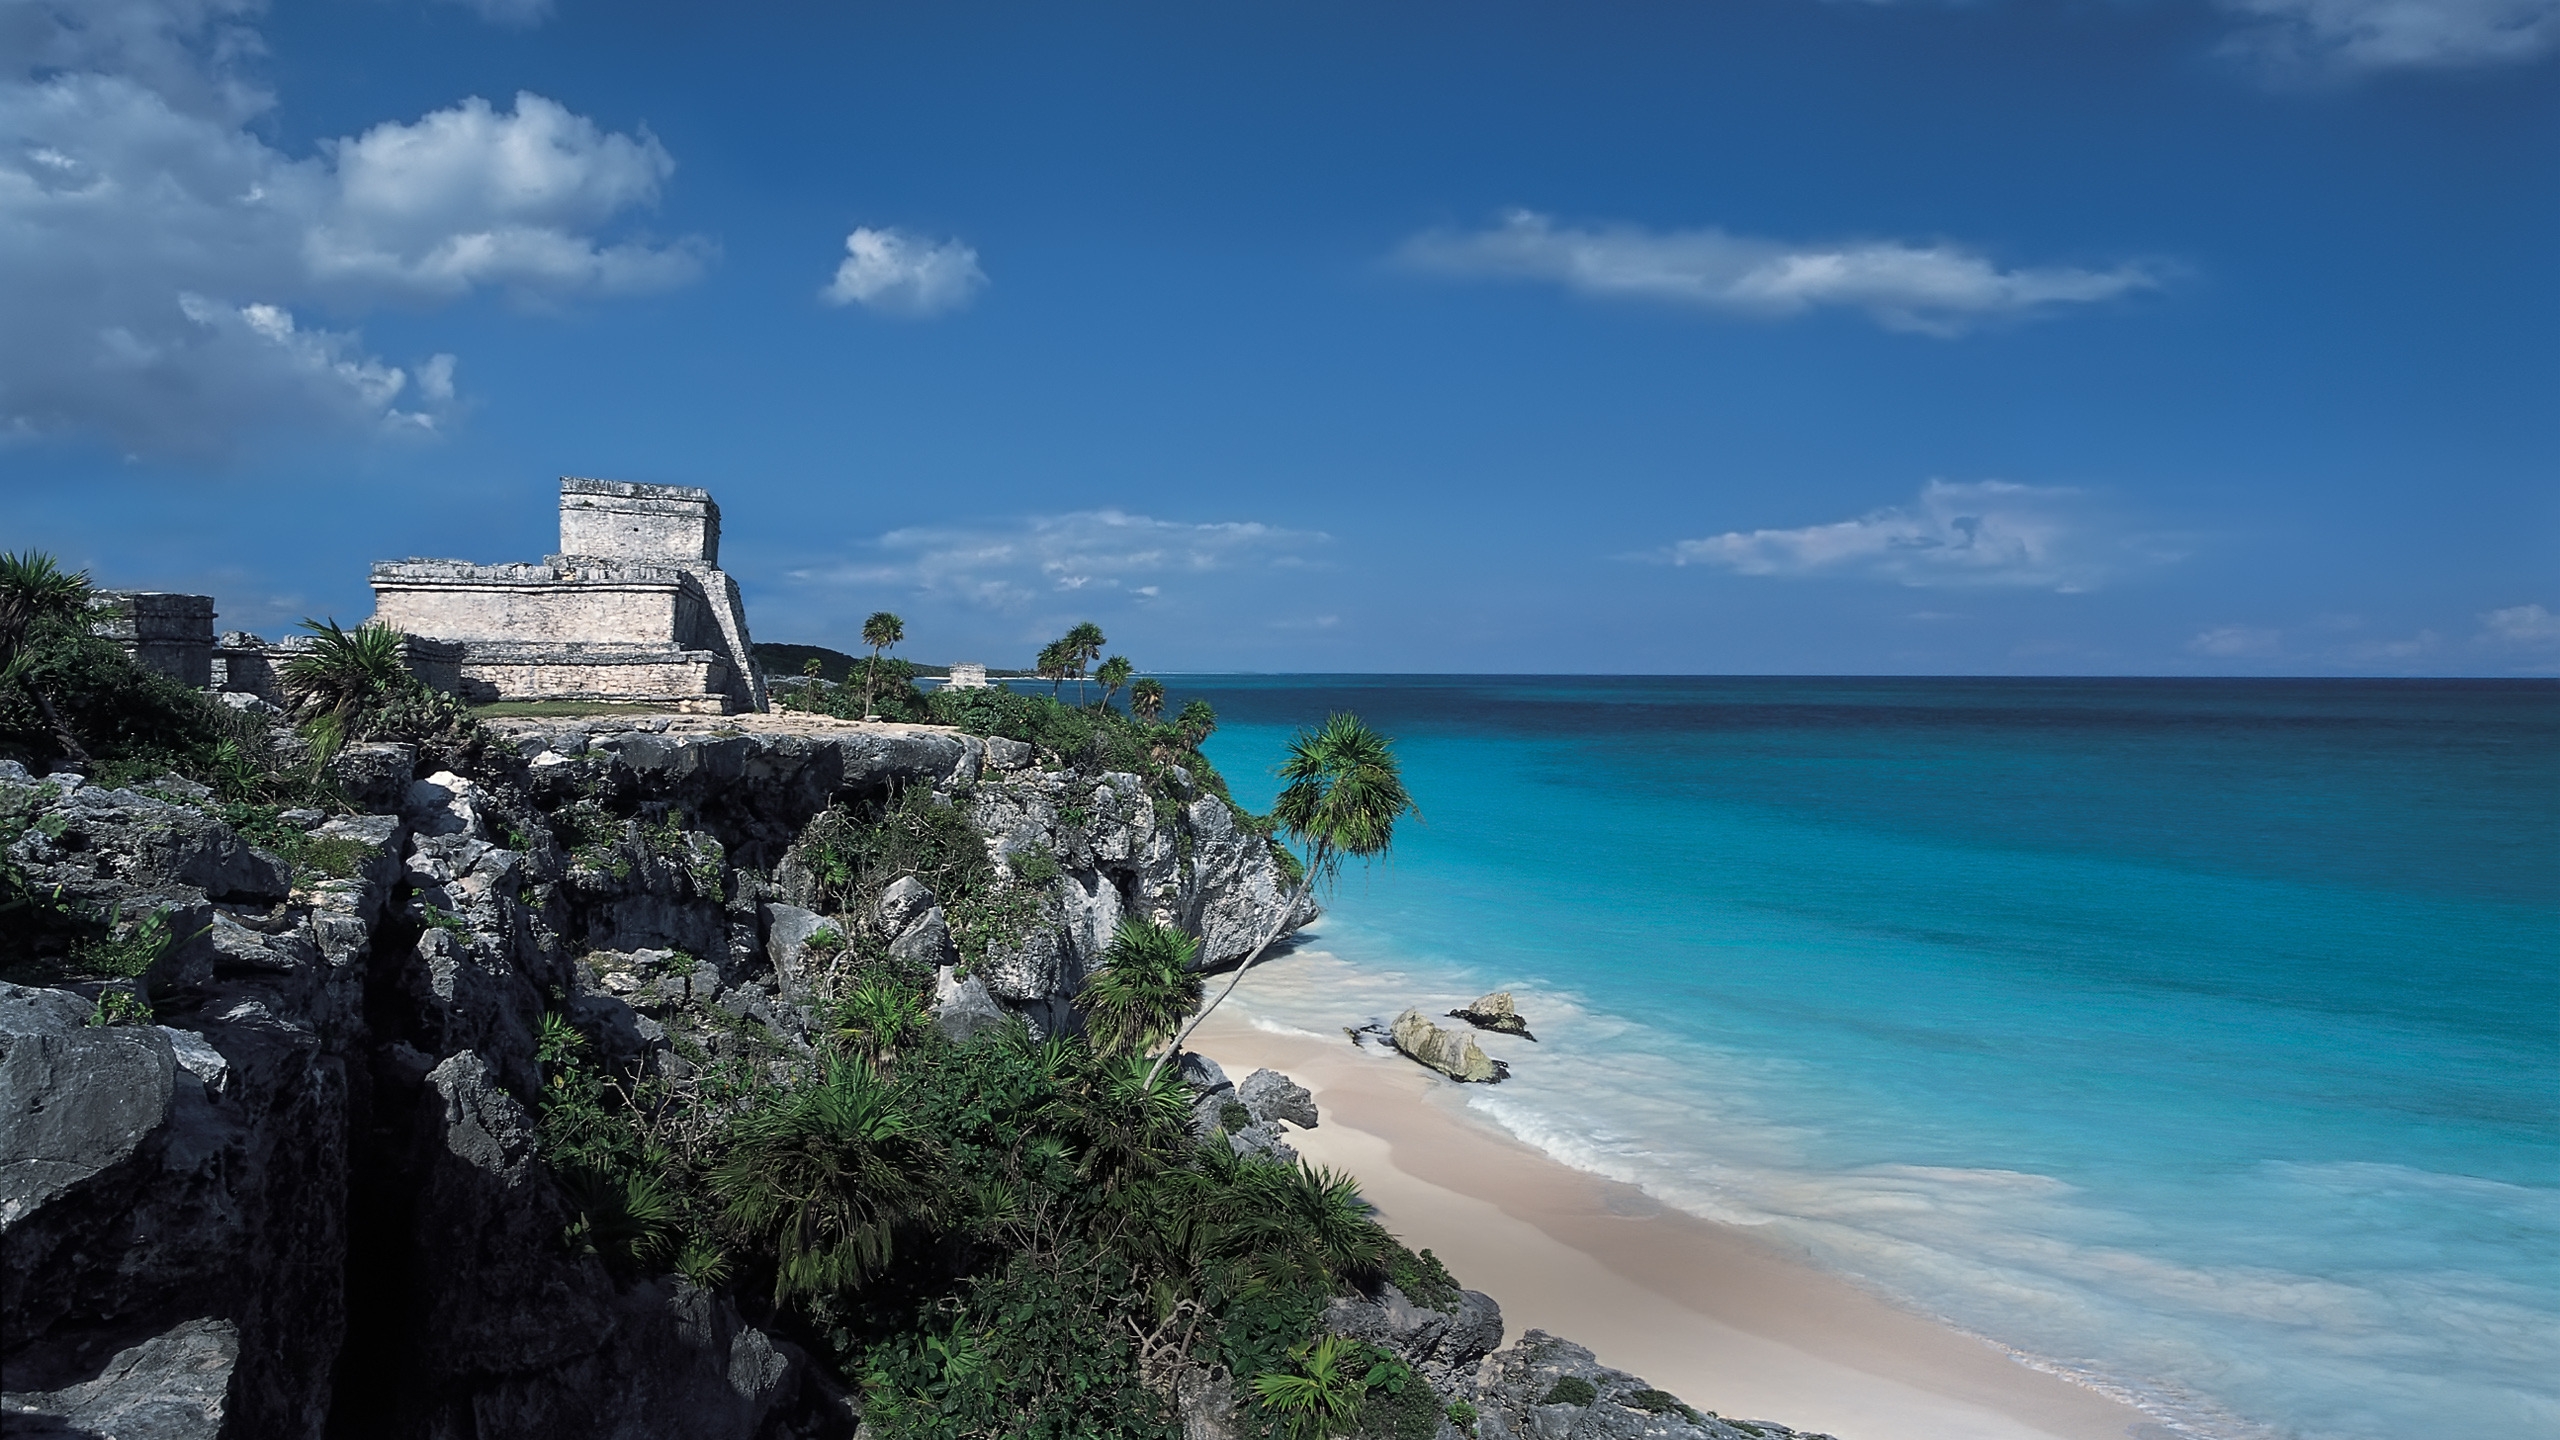 Tulum Mexico for 2560x1440 HDTV resolution